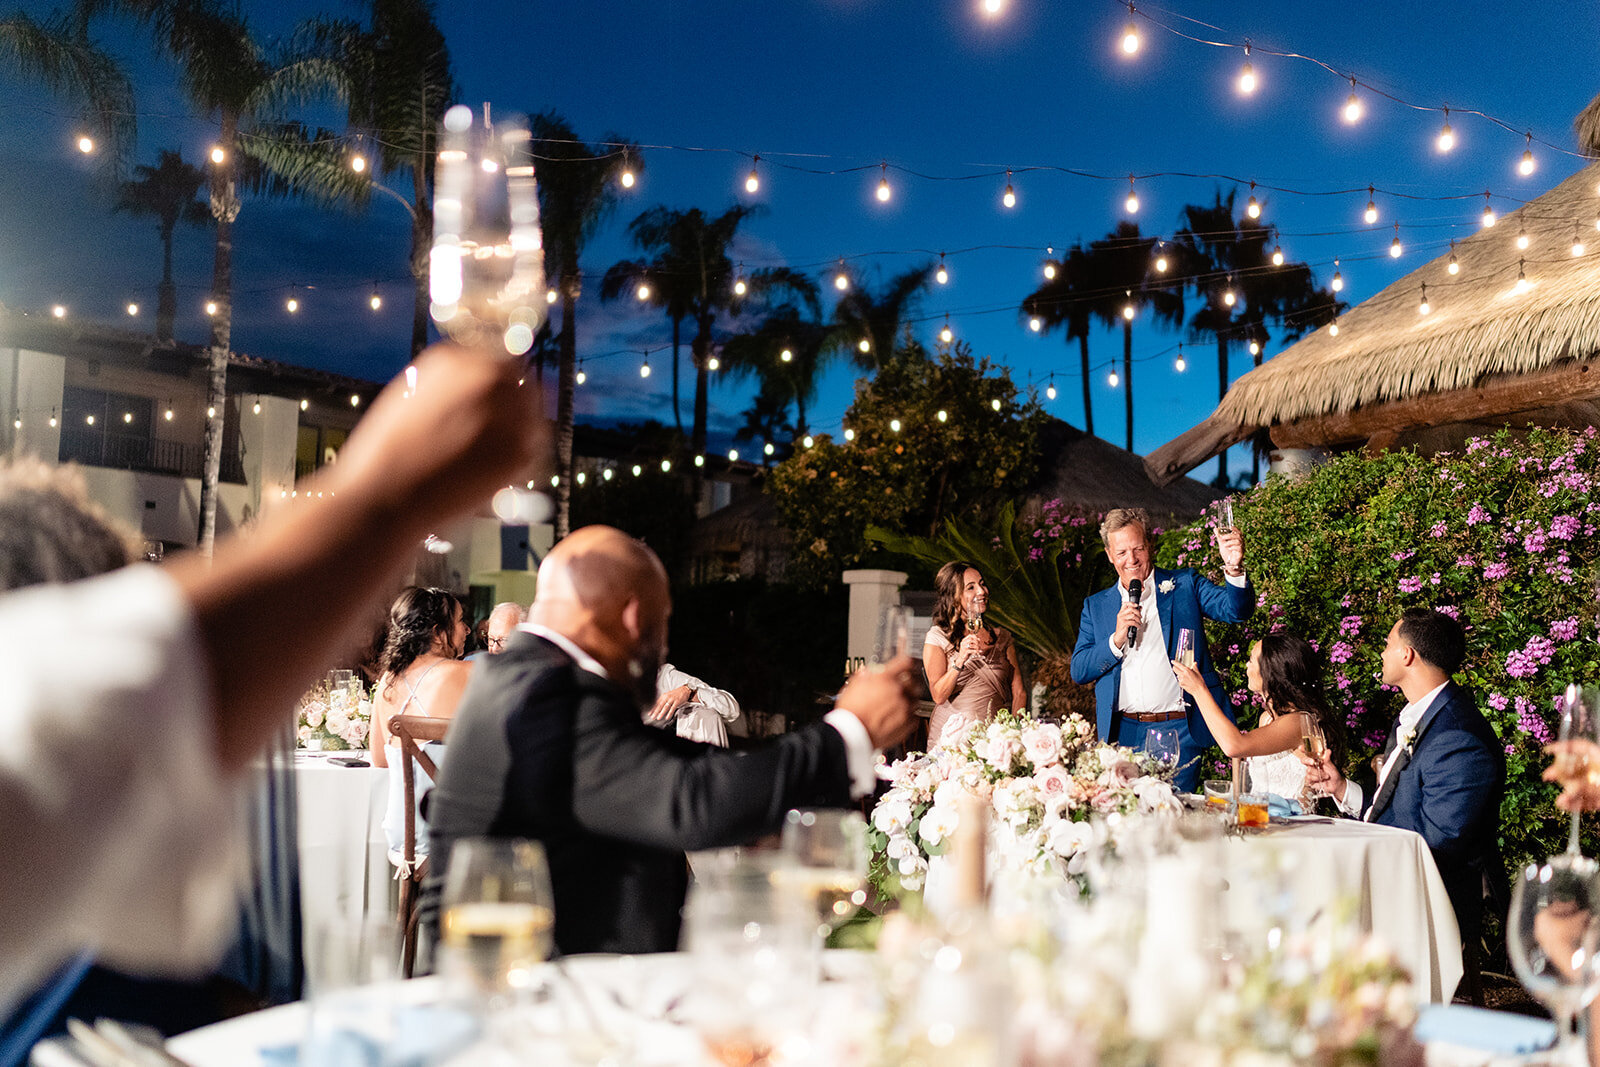 The Father of the groom is giving a toast to the couple while their guests raise their drinks with string lights above and a beautiful dark blue sky at Kona Kai